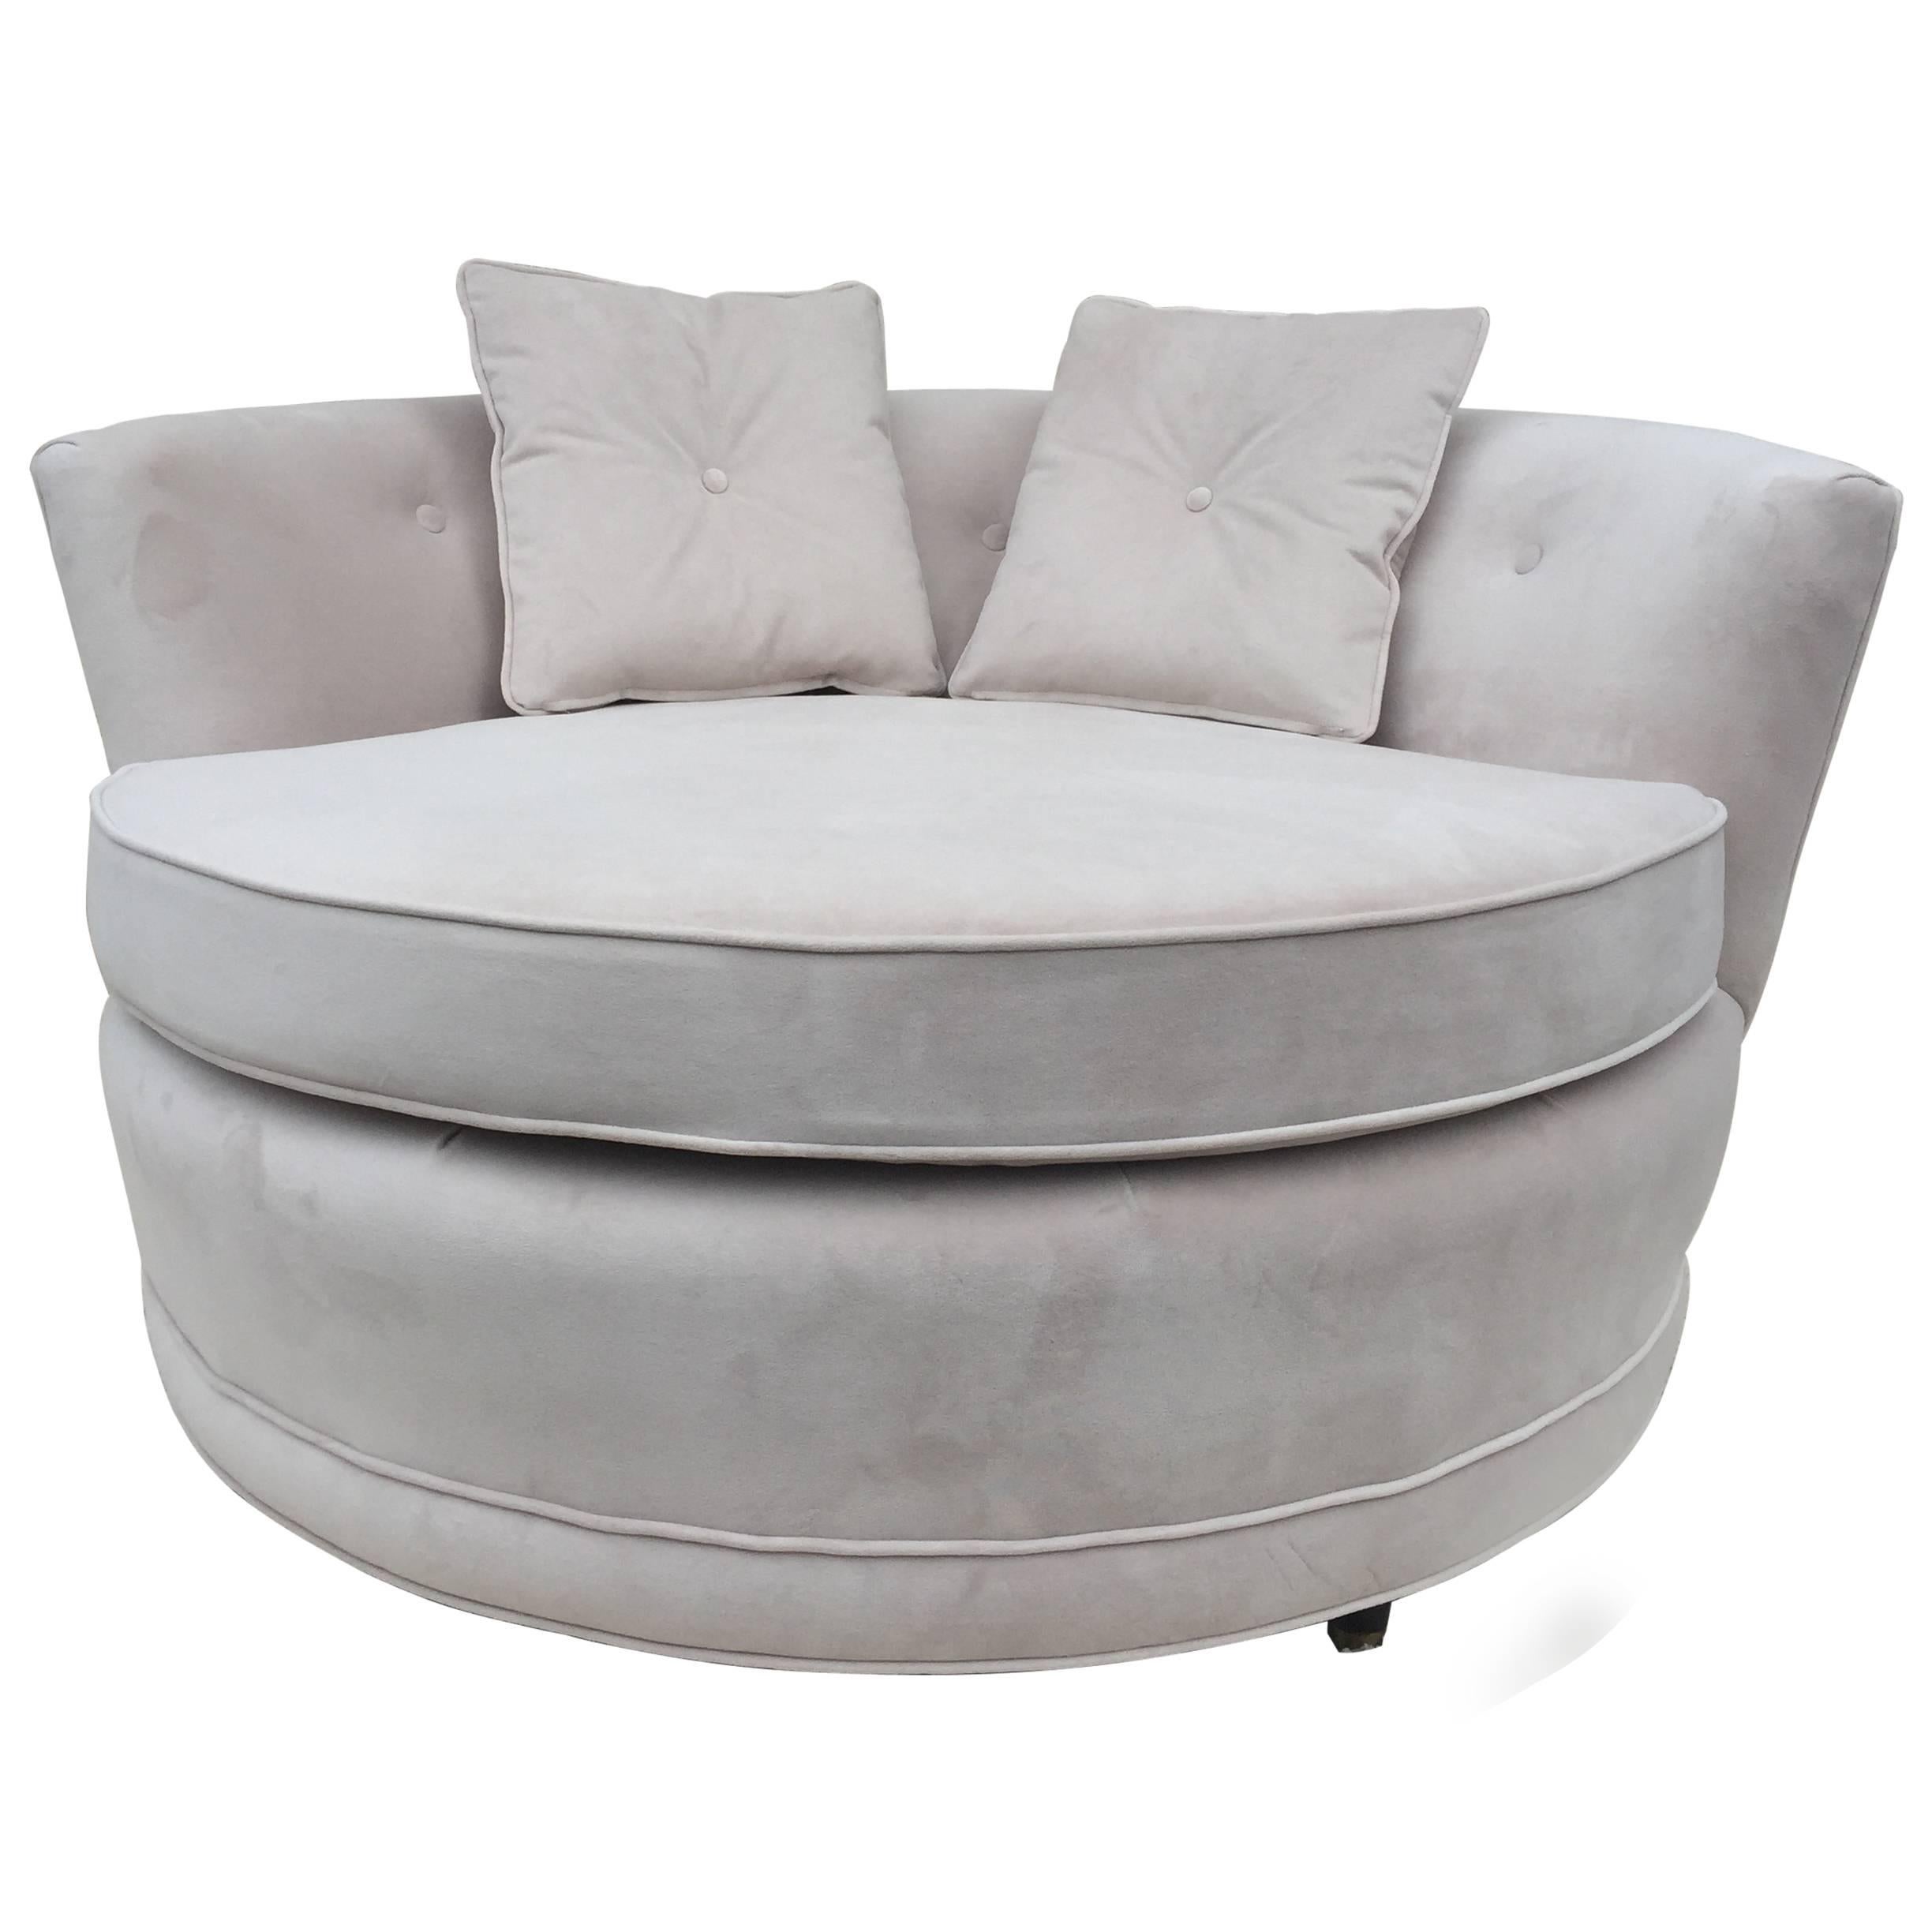 Milo Baughman Style Extra Large Circular Two-Seat Club Chair